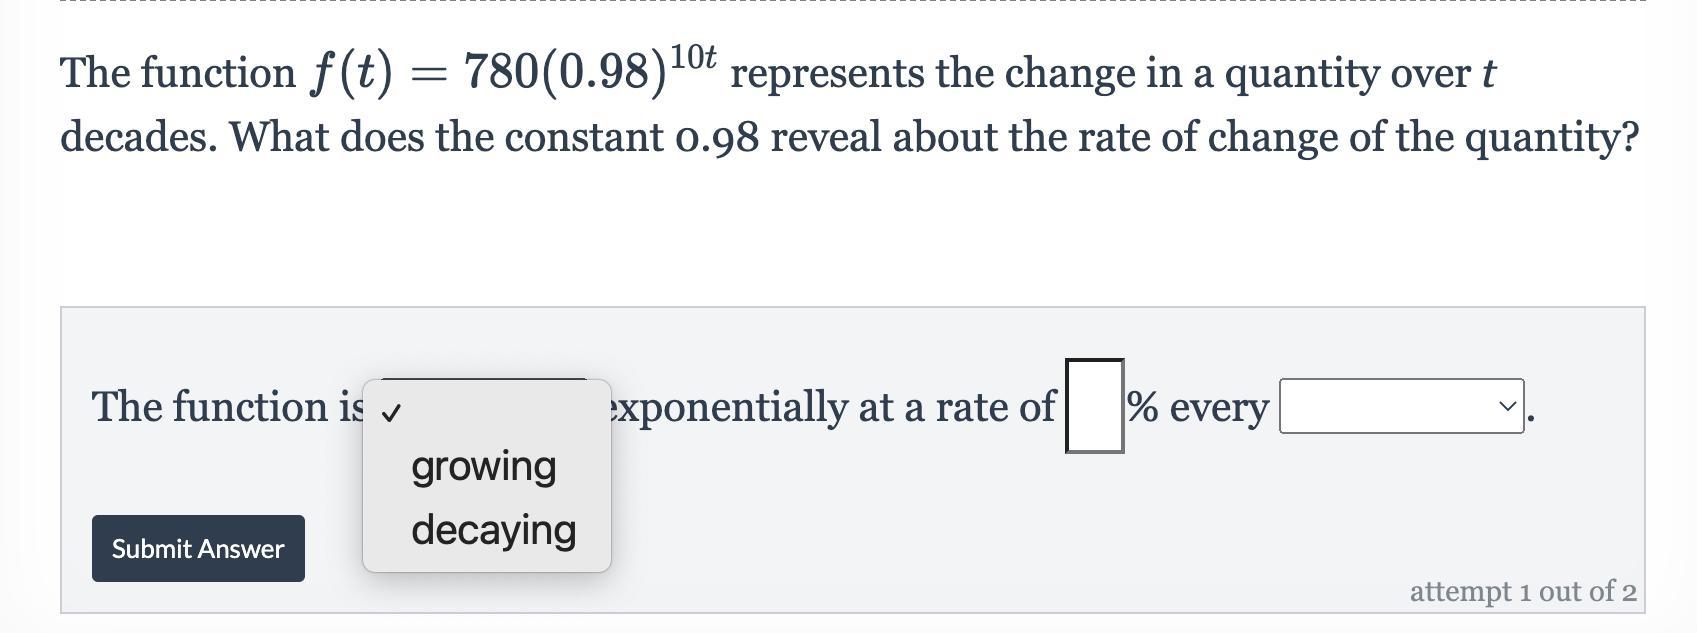 What Does The Constant 0.98 Reveal About The Rate Of Change Of The Quantity?